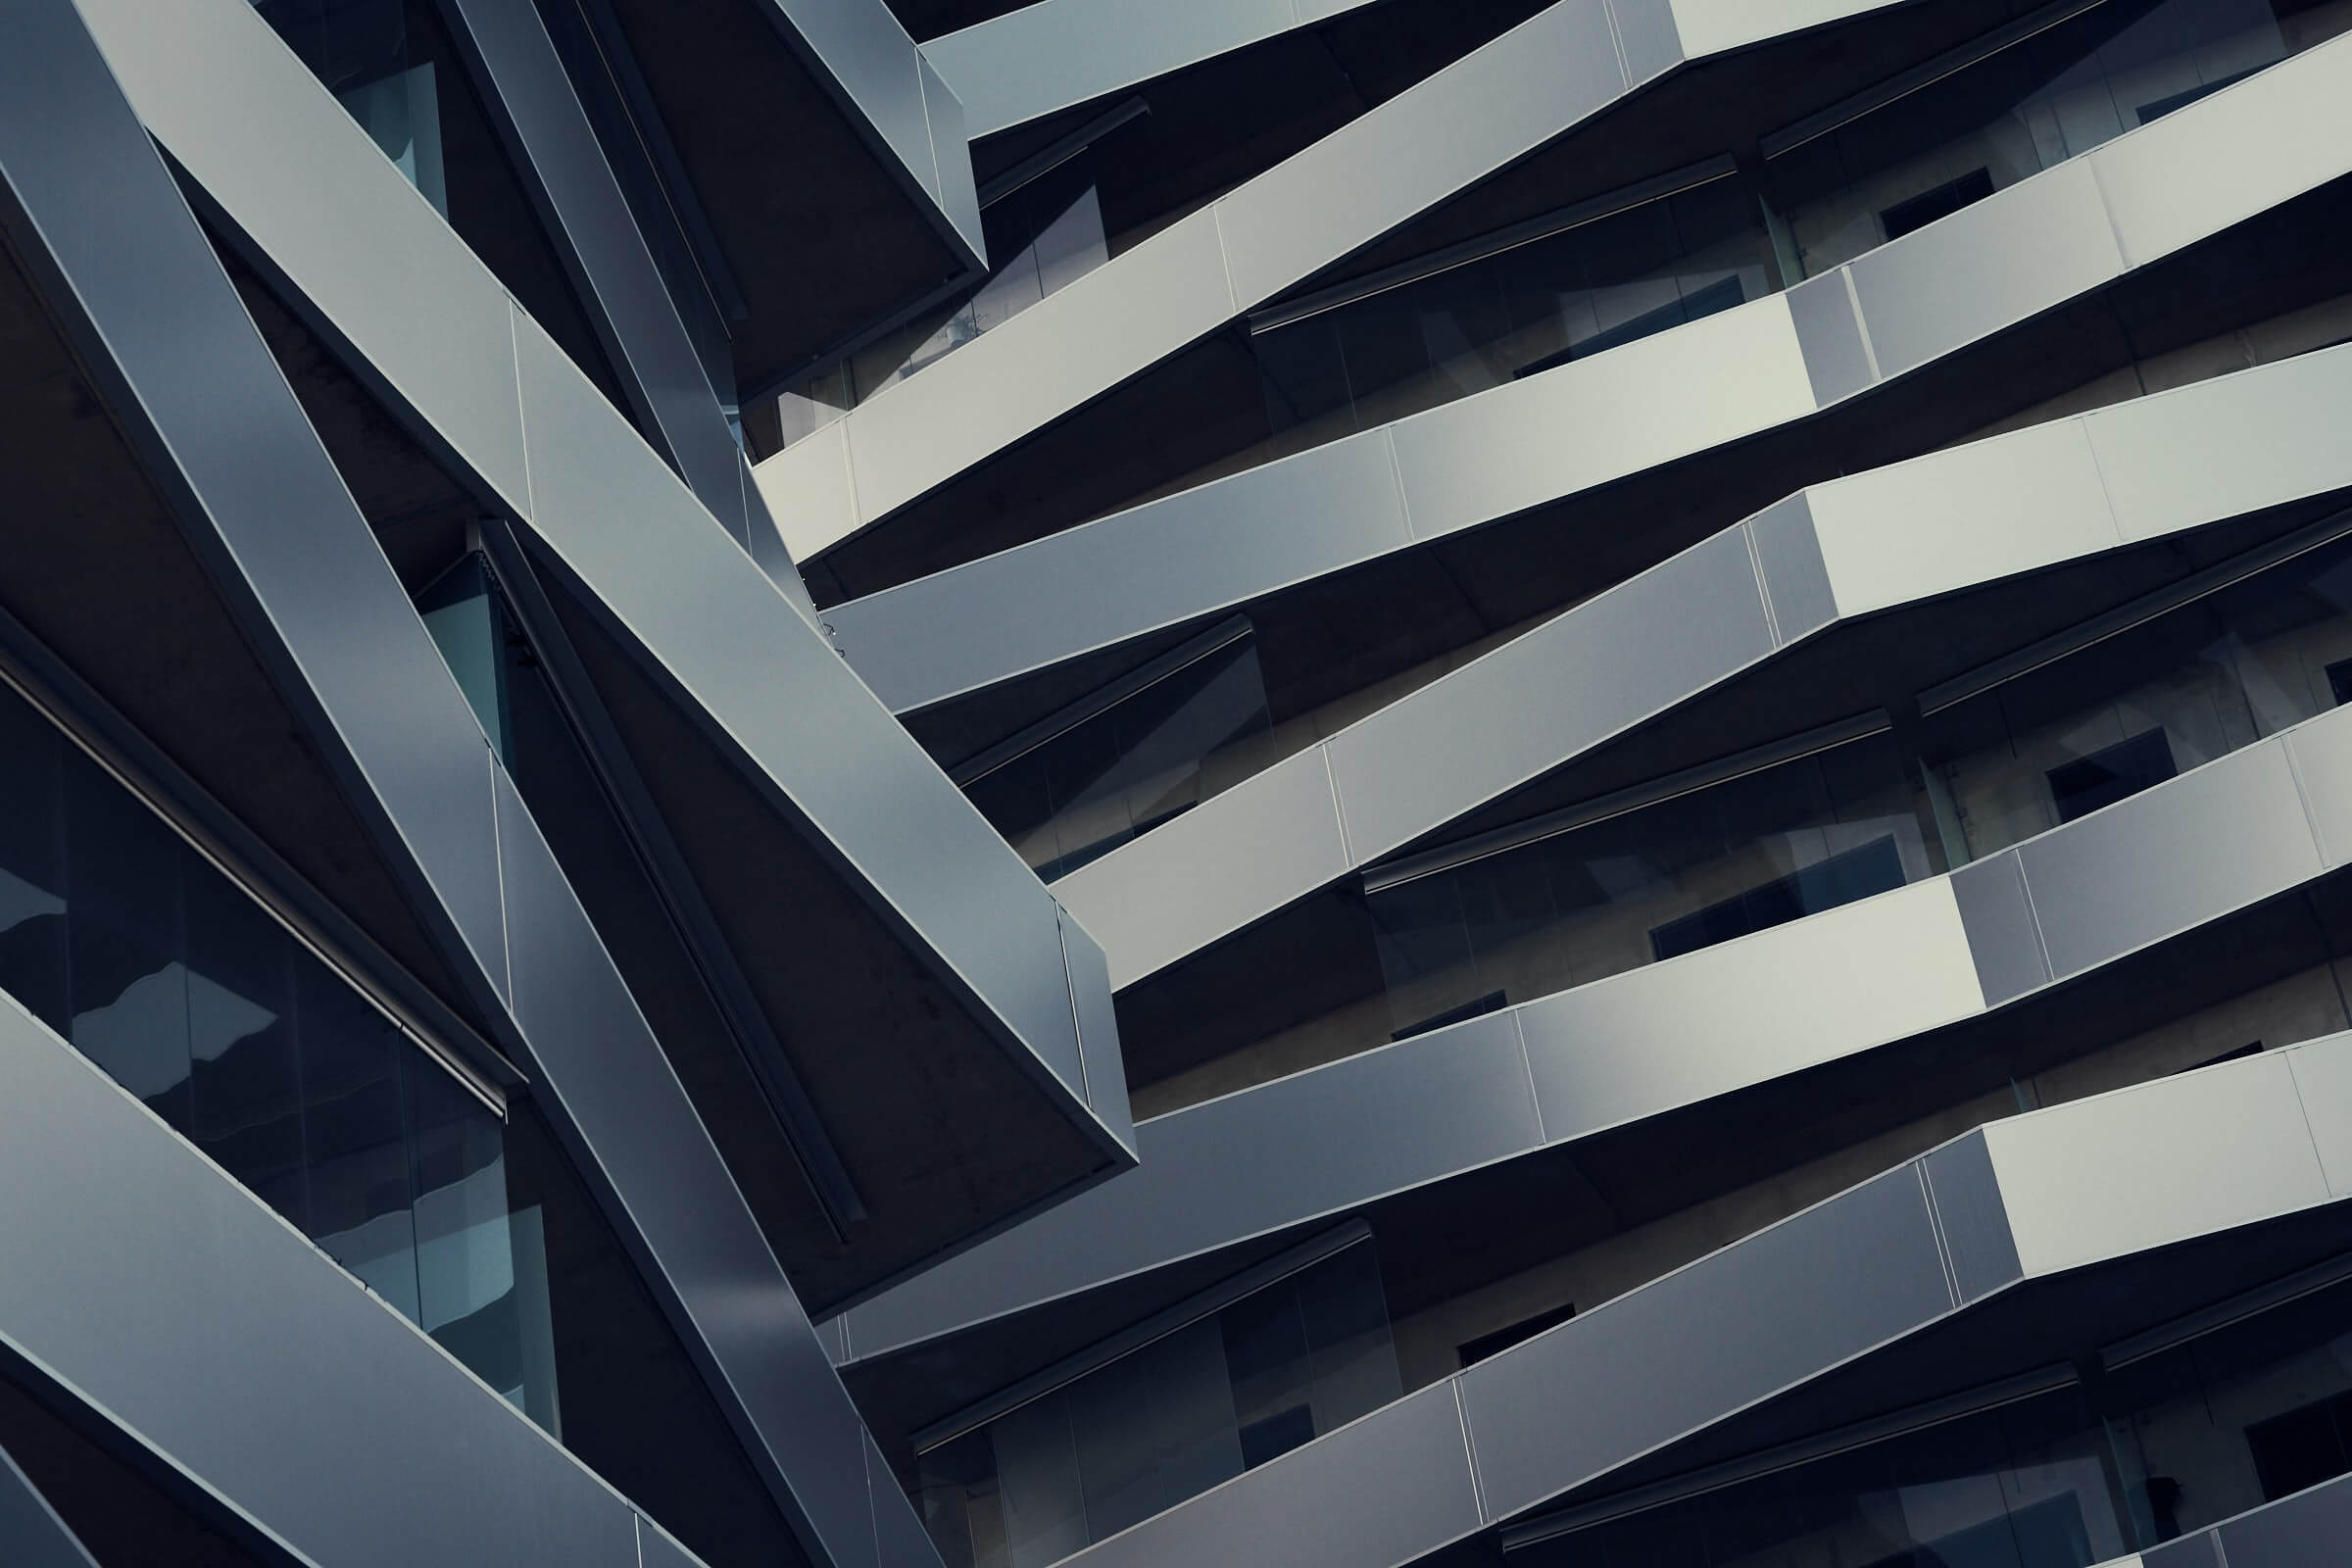 a decorative background image to the main header depicting an abstract shot of a building structure